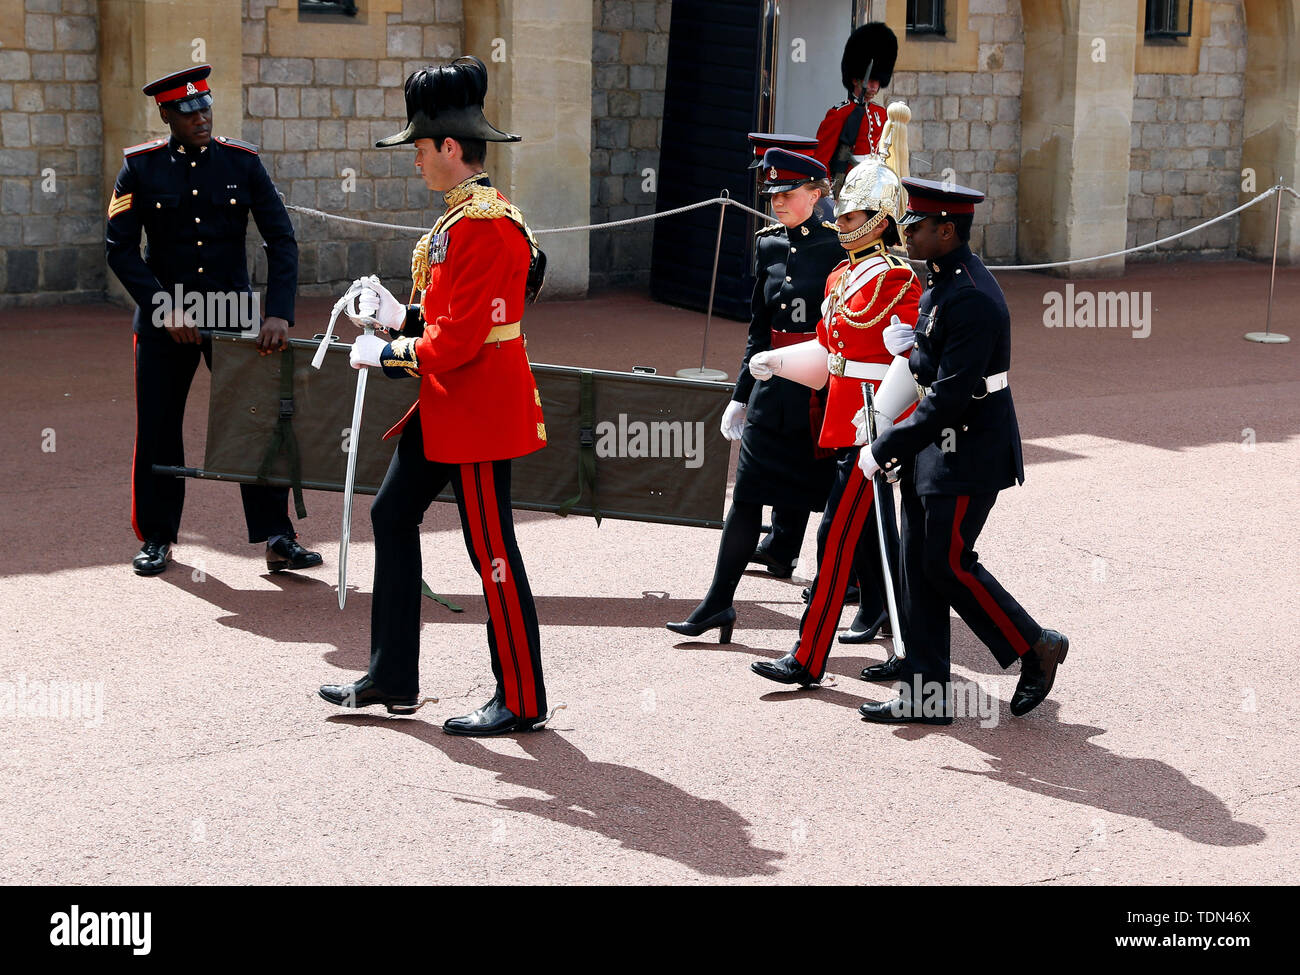 A soldier is being taken away after feeling unwell before the Order of the Garter Service at Windsor Castle, Windsor, Britain June 17, 2019. REUTERS/Peter Nicholls/Pool Stock Photo